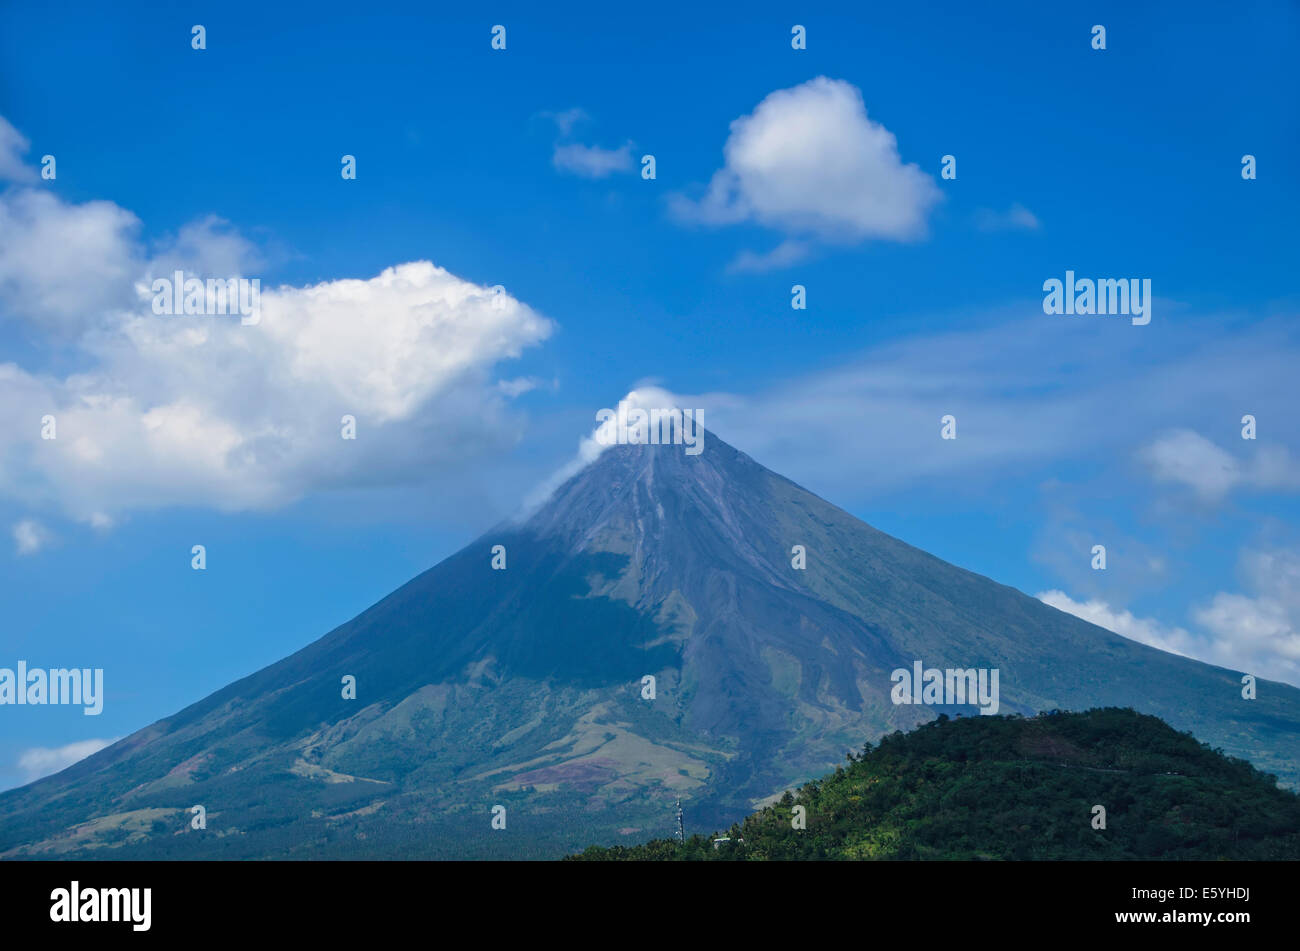 The Perfect Cone Of Mayon Volcano South Of Luzon Philippines Stock